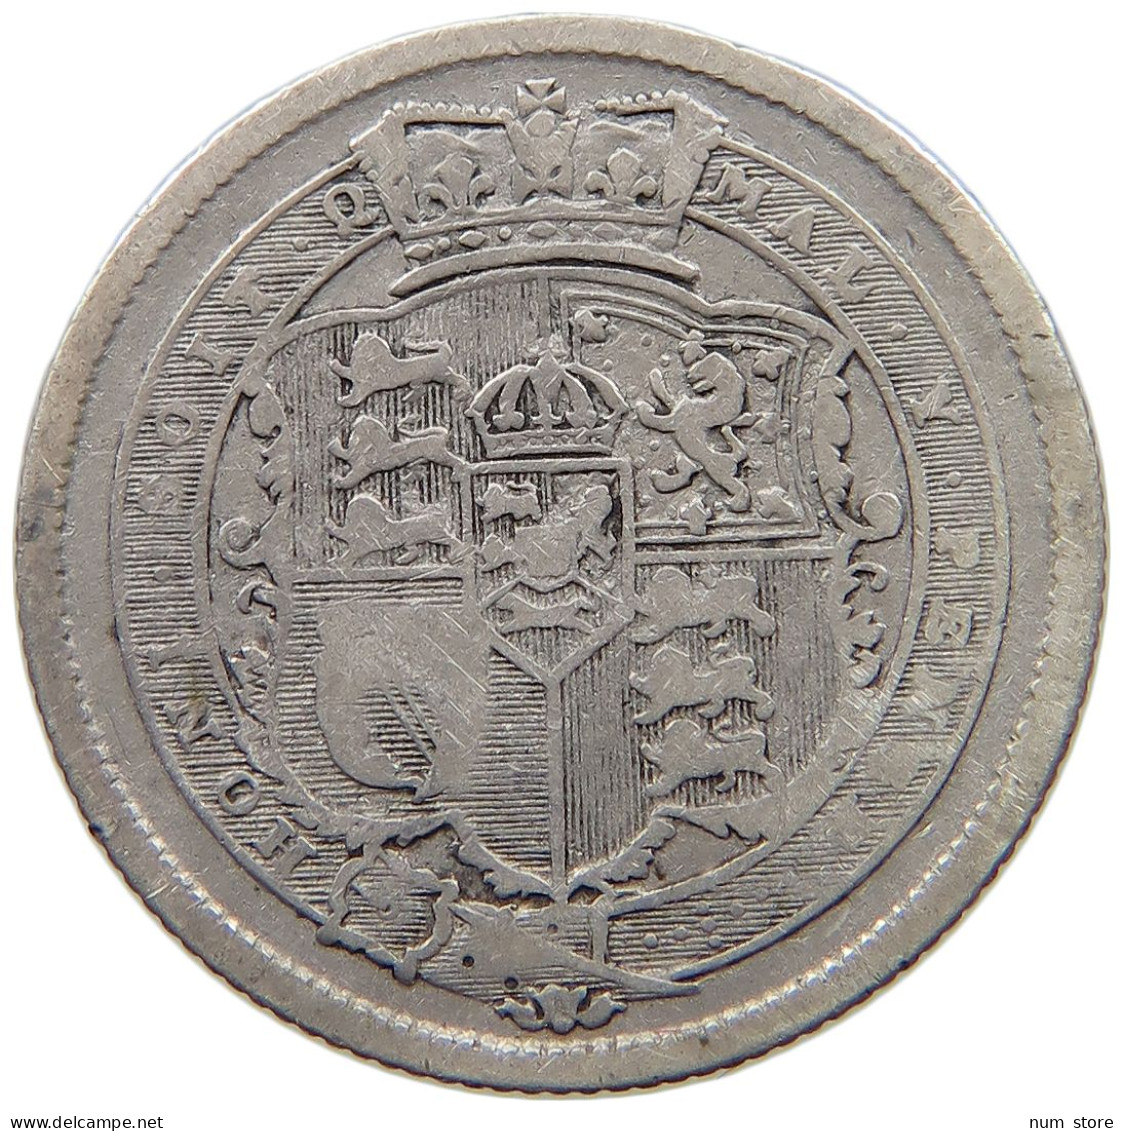 GREAT BRITAIN SHILLING 1817 GEORGE III. 1760-1820 #t156 0025 - I. 1 Shilling